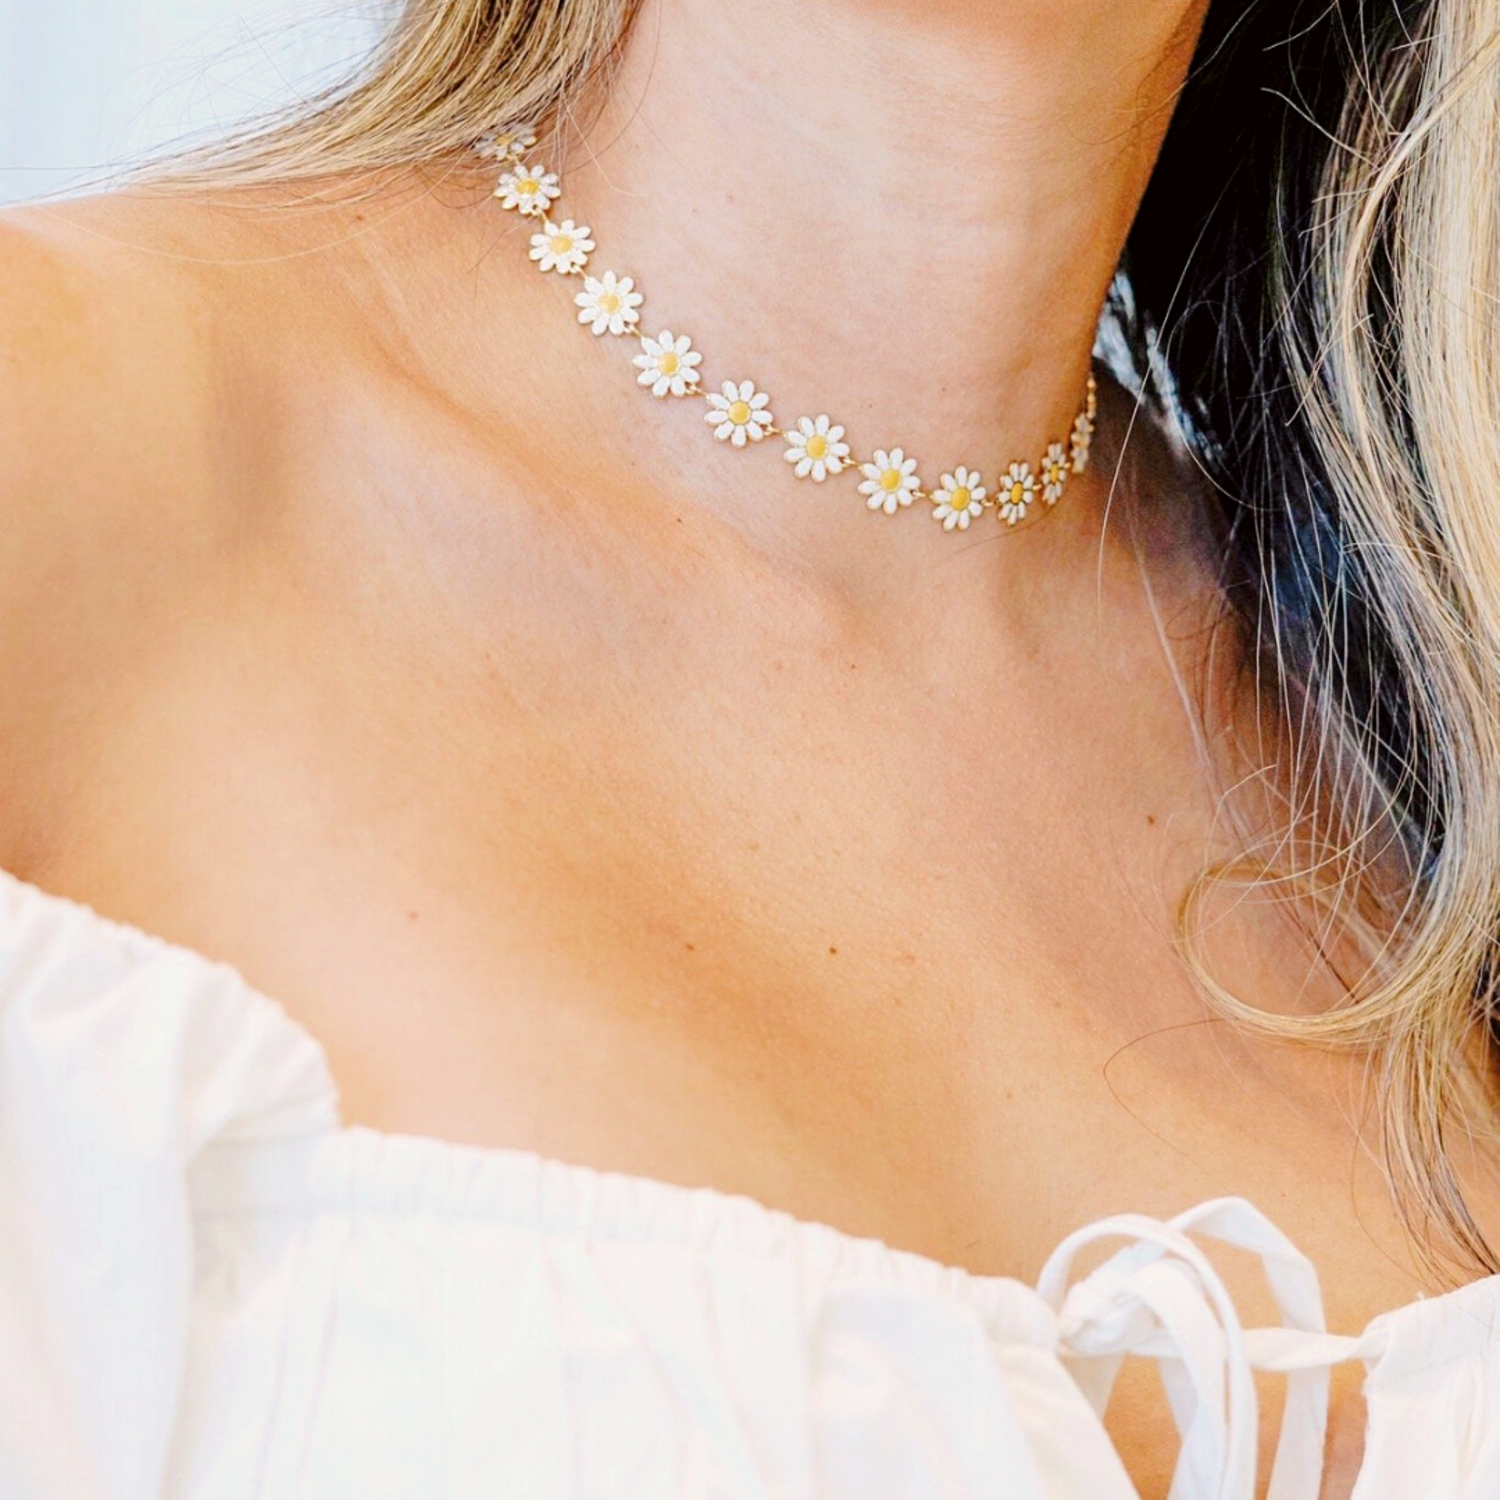 Miss Daisy Choker gold-plated 18k over brass by ISVI Boutique Miami